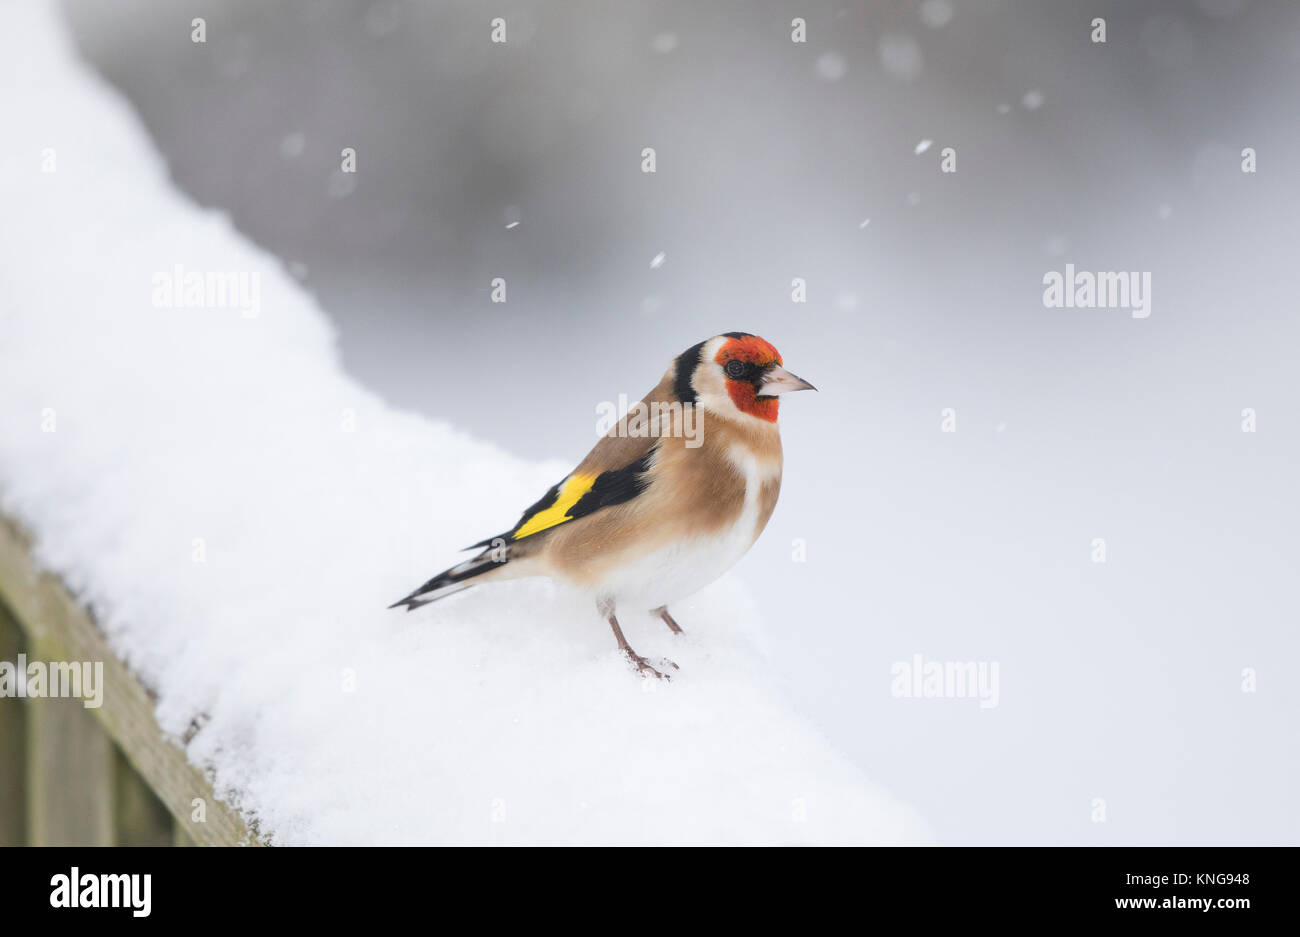 Goldfinch, (Carduelis carduelis), in the snow, Shropshire Borderscold weather, Stock Photo